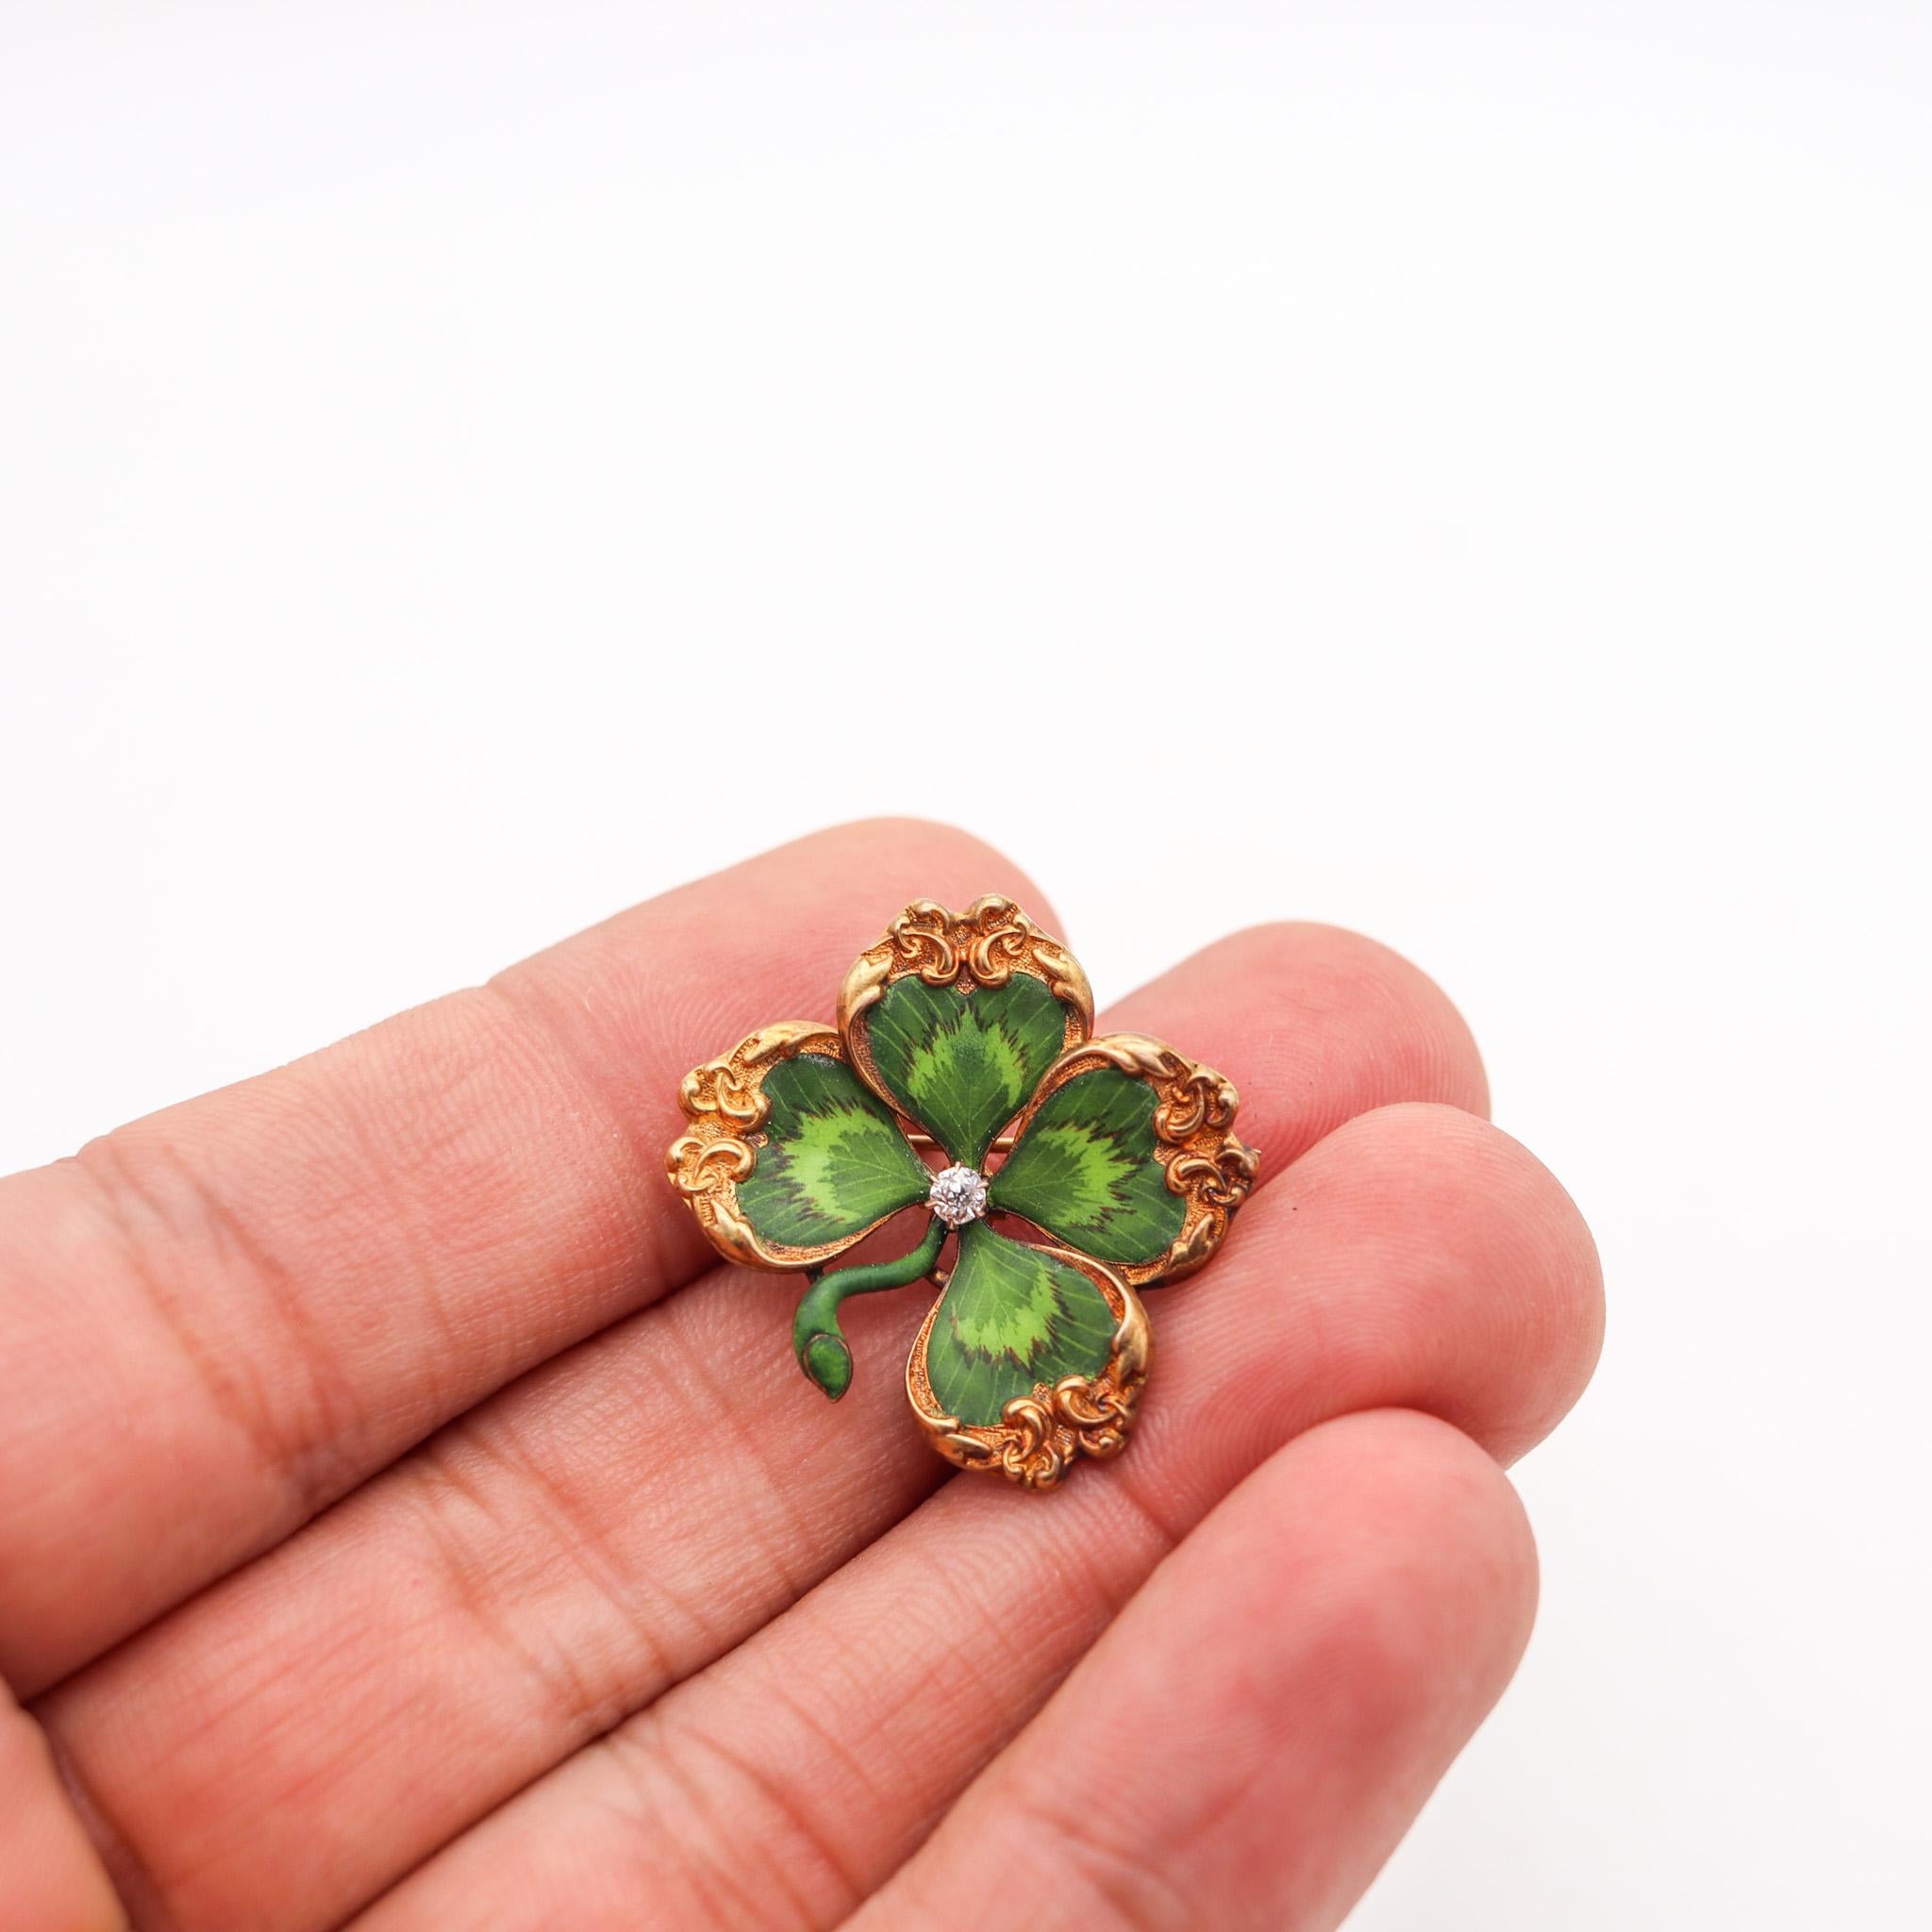 Edwardian 1905 Art Nouveau Enamel Clover Pendant Brooch In 14Kt Gold And Diamond In Excellent Condition For Sale In Miami, FL